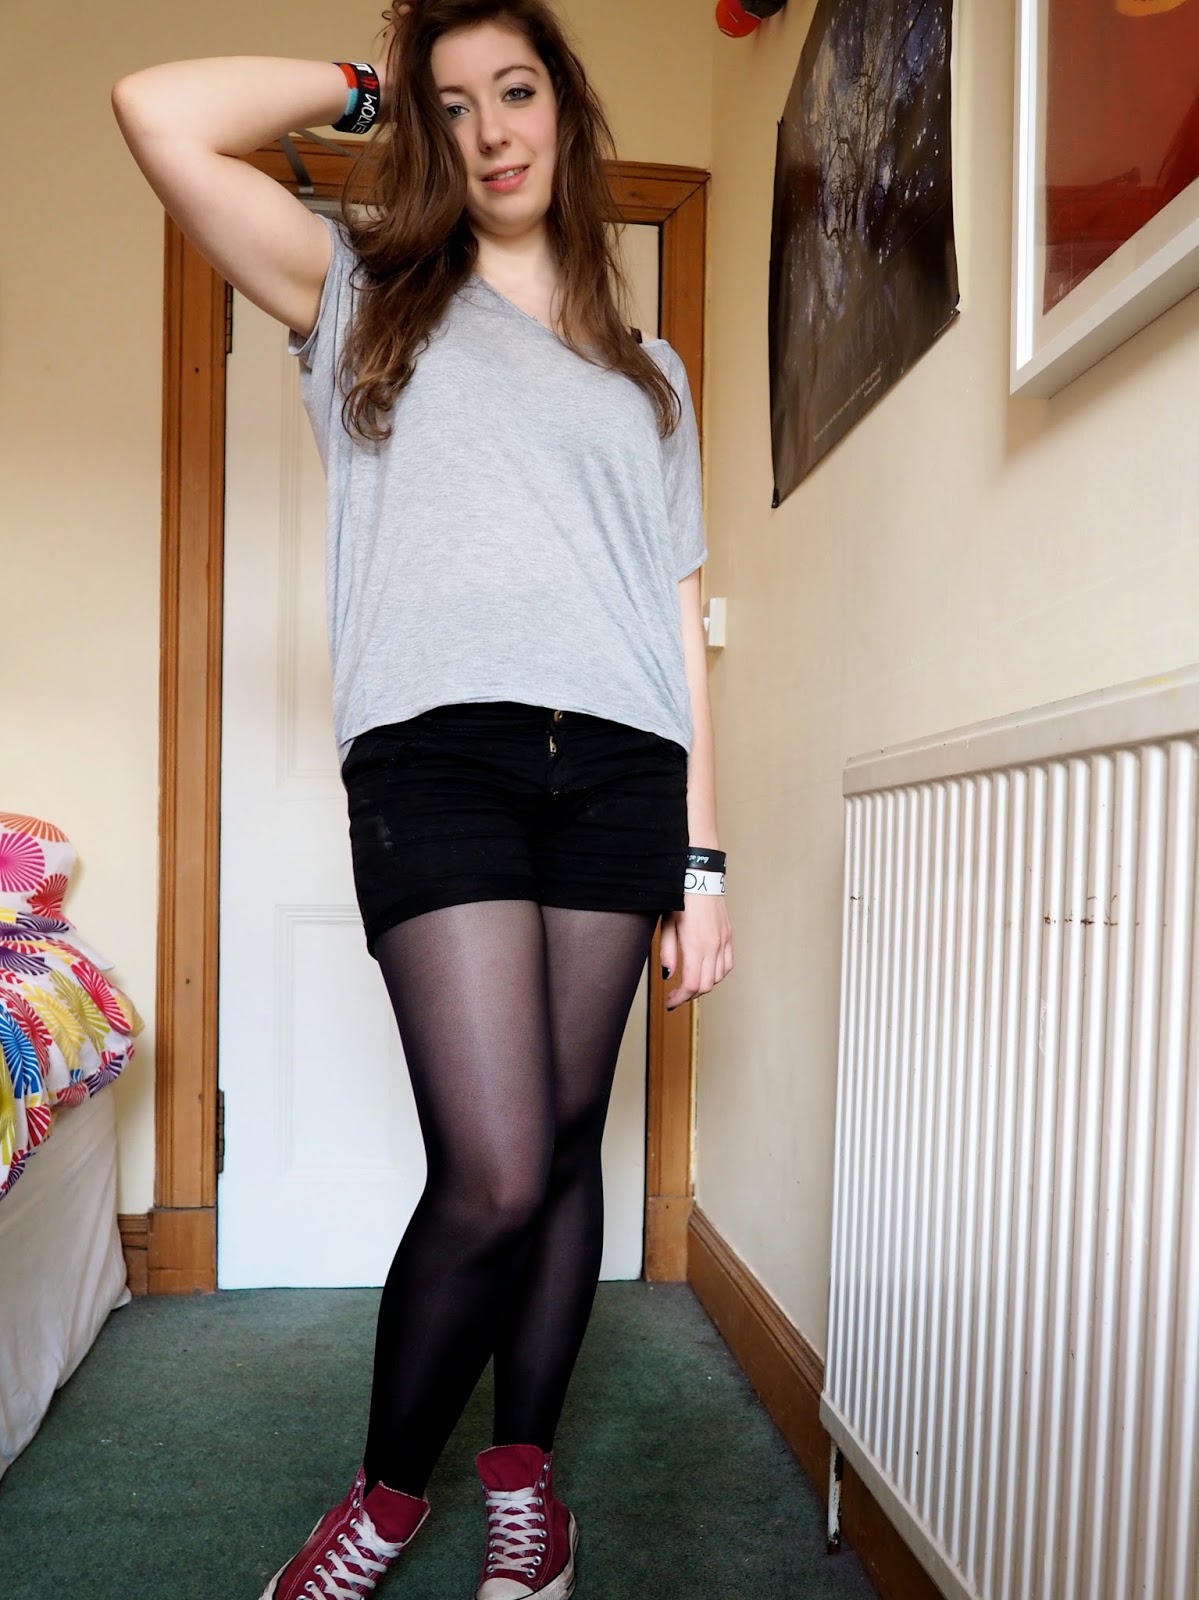 Gig Wear outfit - loose grey top, black denim shorts and tights, red high top converse